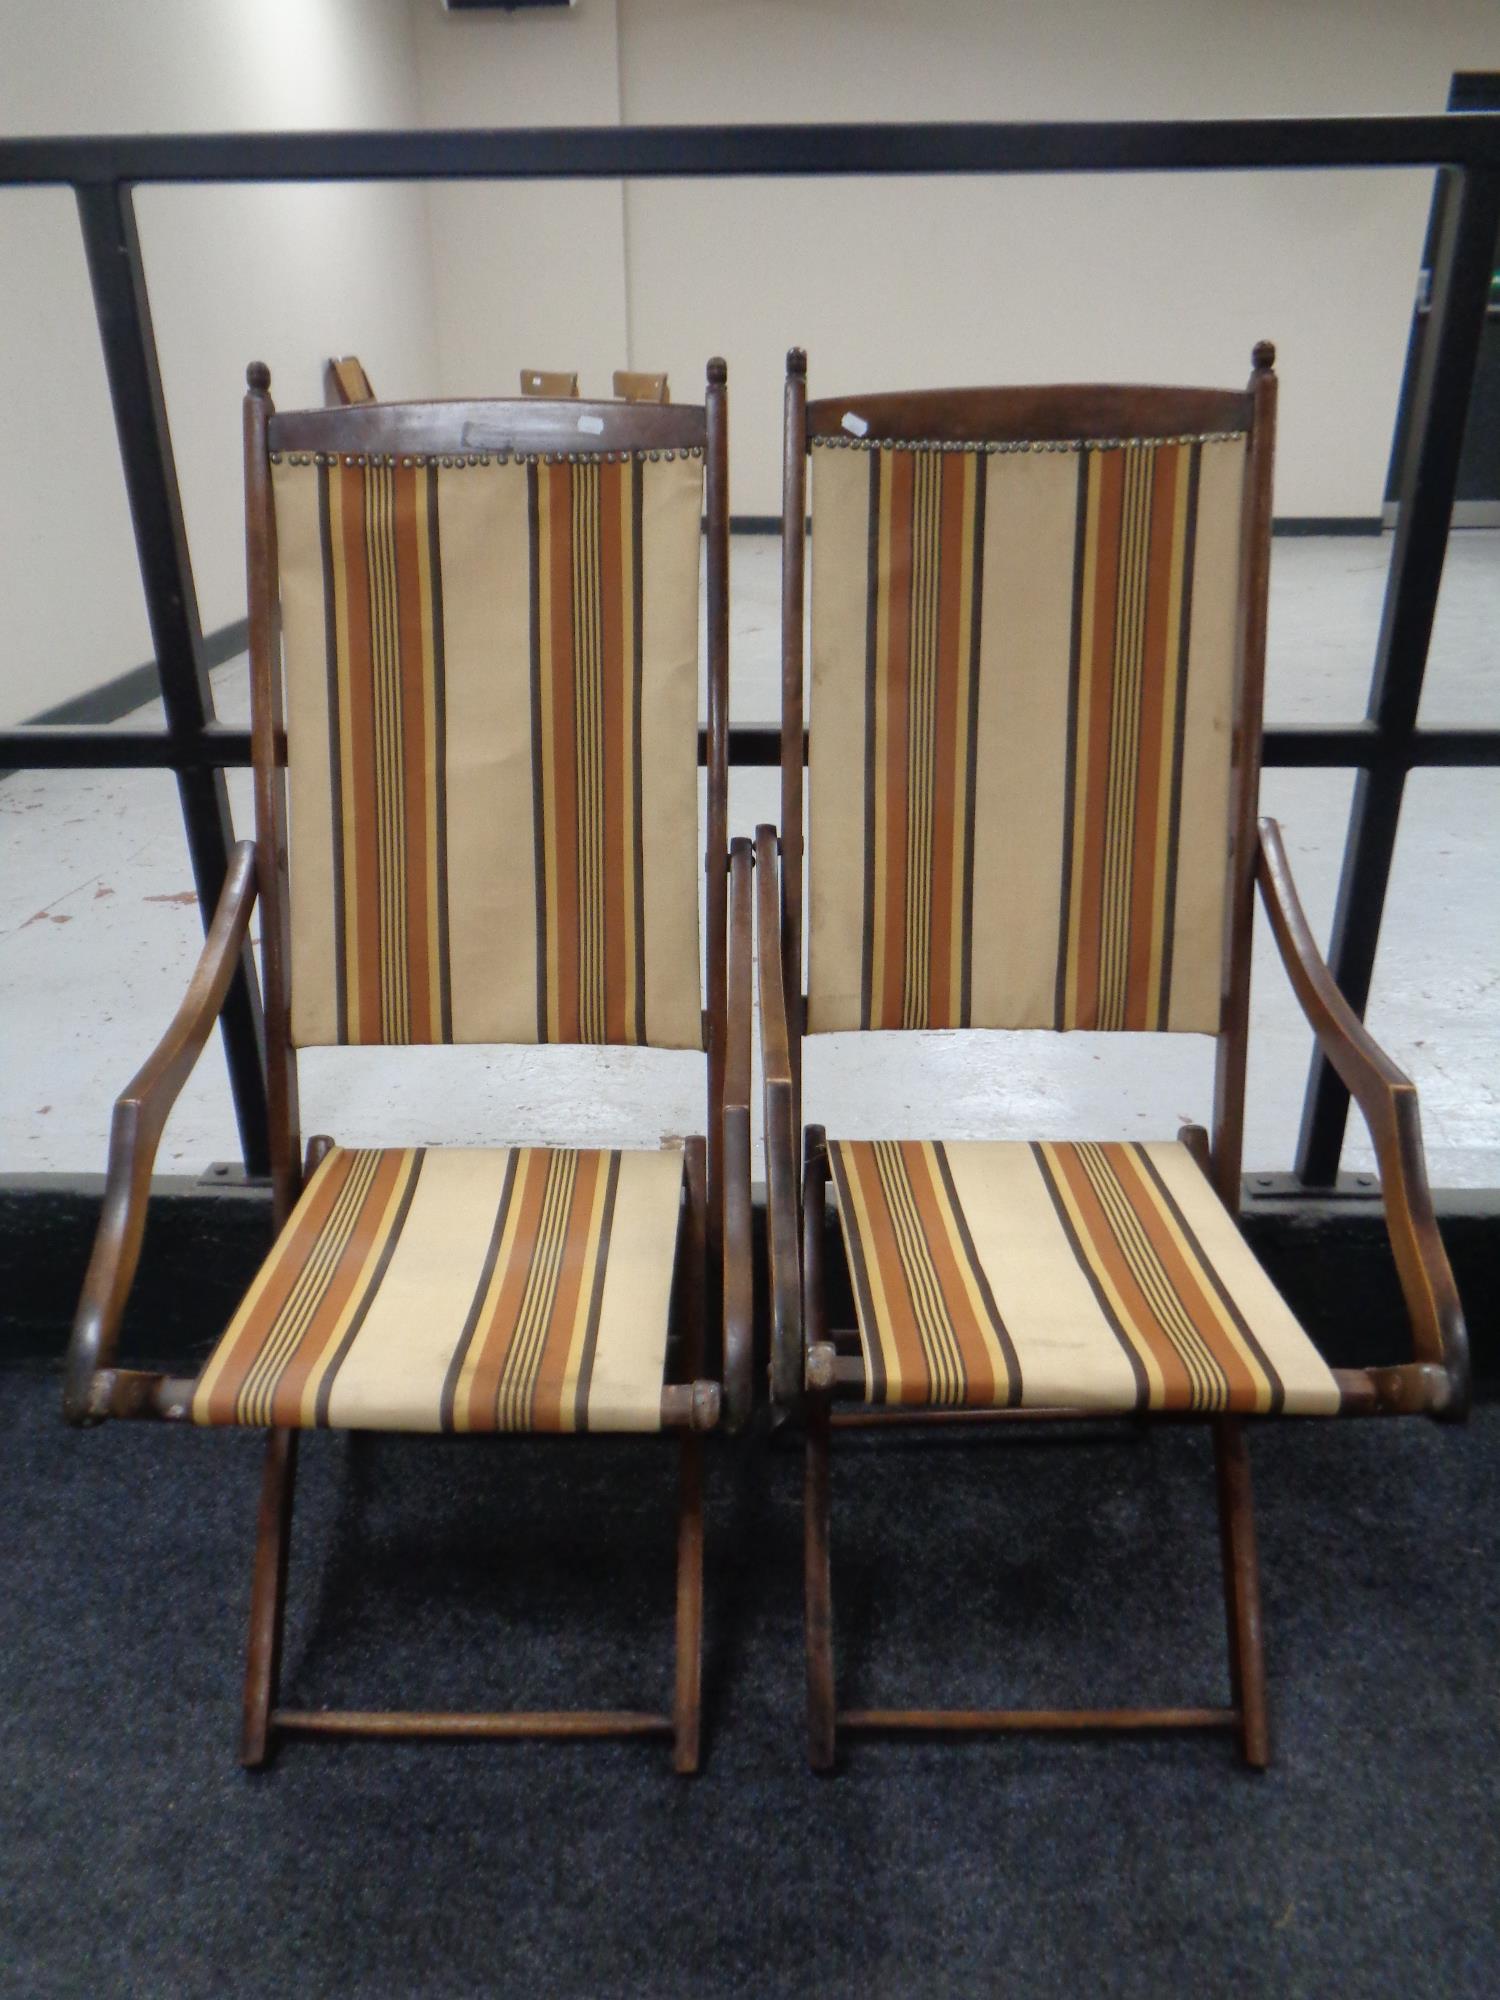 A pair of 20th century beech folding campaign style chairs upholstered in a striped fabric